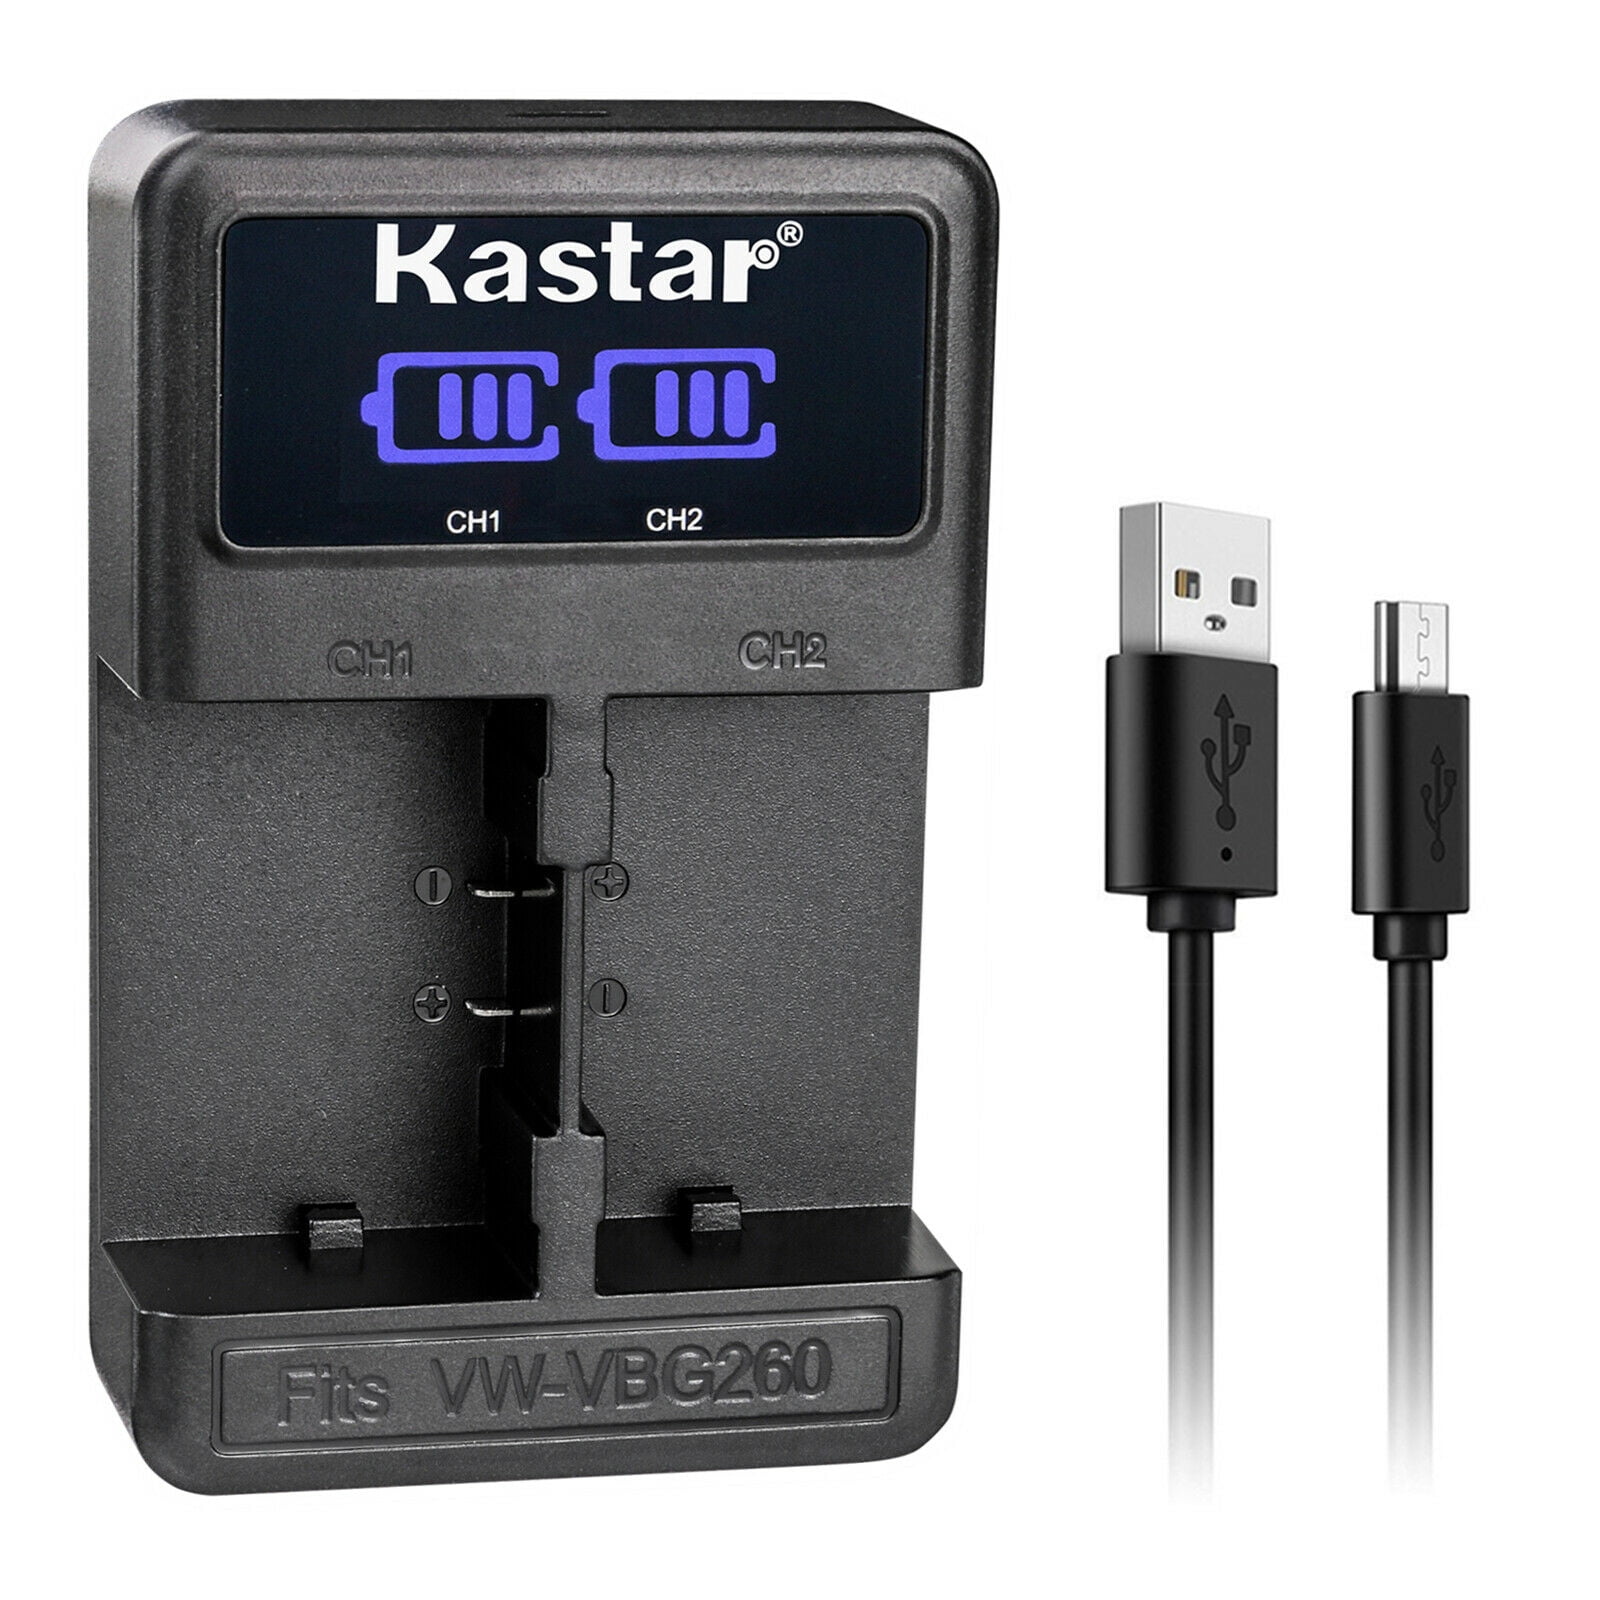 Panasonic VW-VBG070 Kastar 3 Pack Battery and LCD Dual USB Charger Compatible with Panasonic SDR-H79K SDR-H79P SDR-H80PC SDR-H80R VW-VBG260 VW-VBG130 SDR-H80A SDR-H80P SDR-H80K SDR-H80